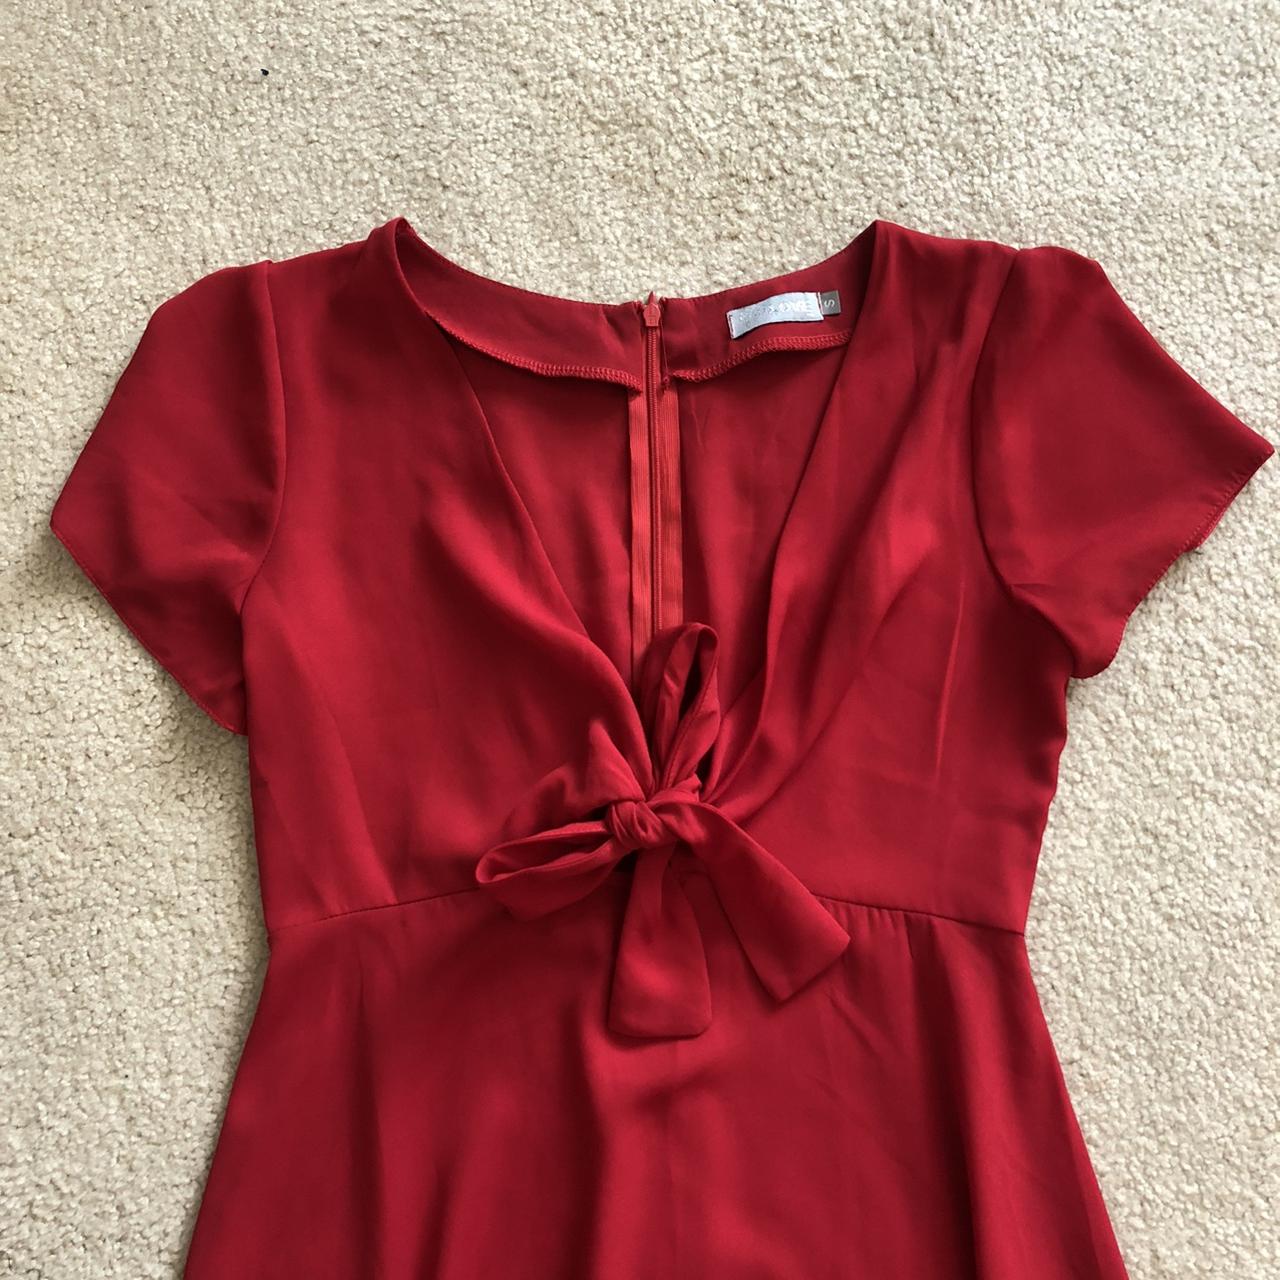 Product Image 3 - Babydoll Red Dress ♥️

Brand: Love
Condition: